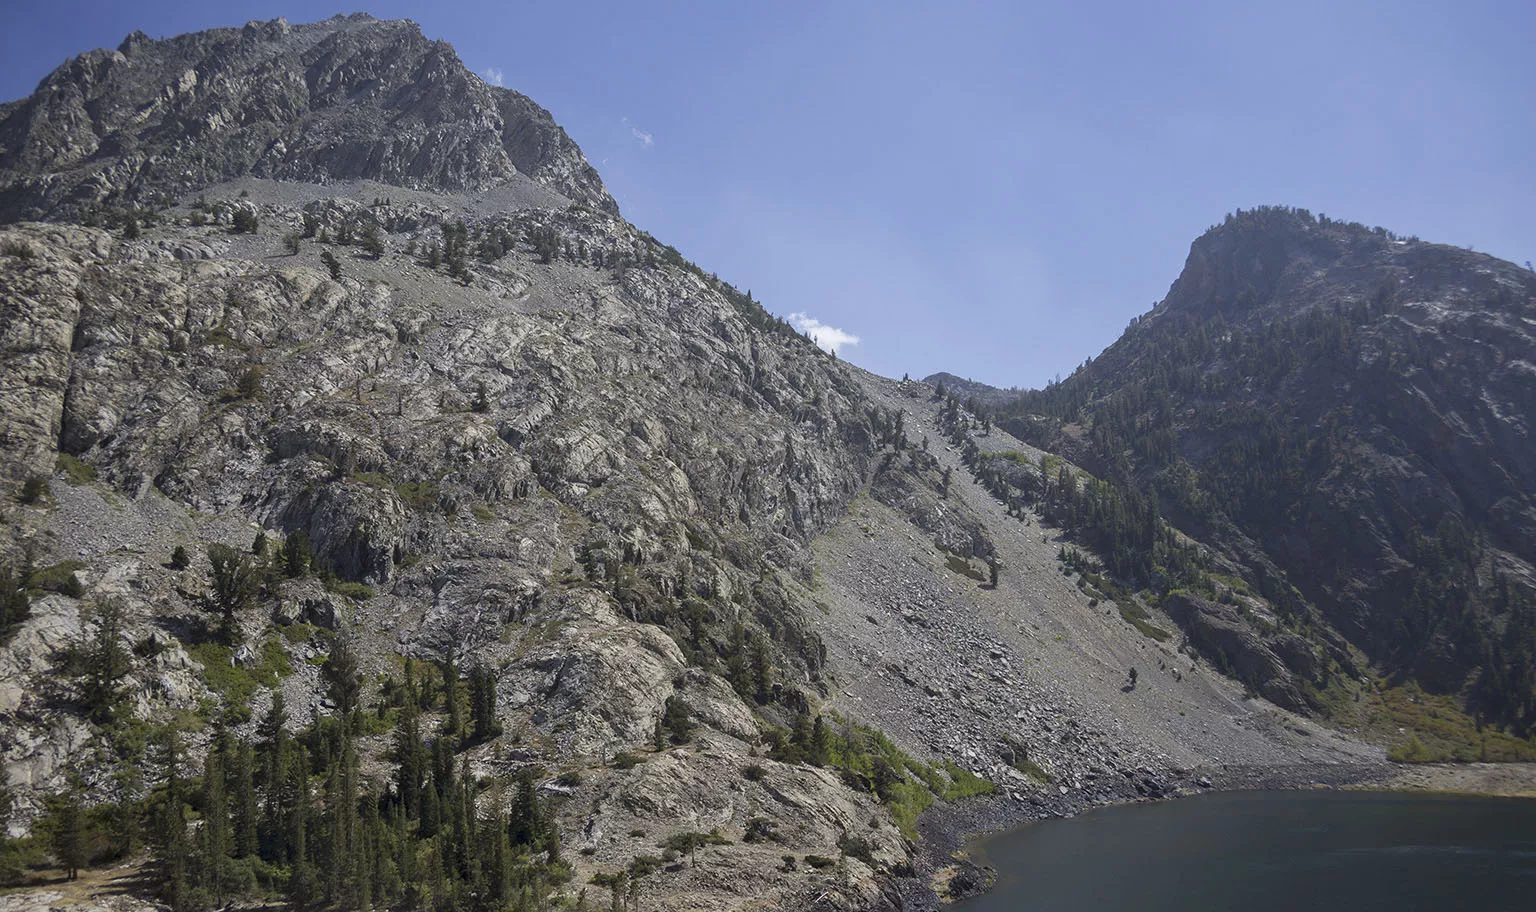 Agnew Lake. Part of the steep trail leading up to Agnew Pass can be seen in the center